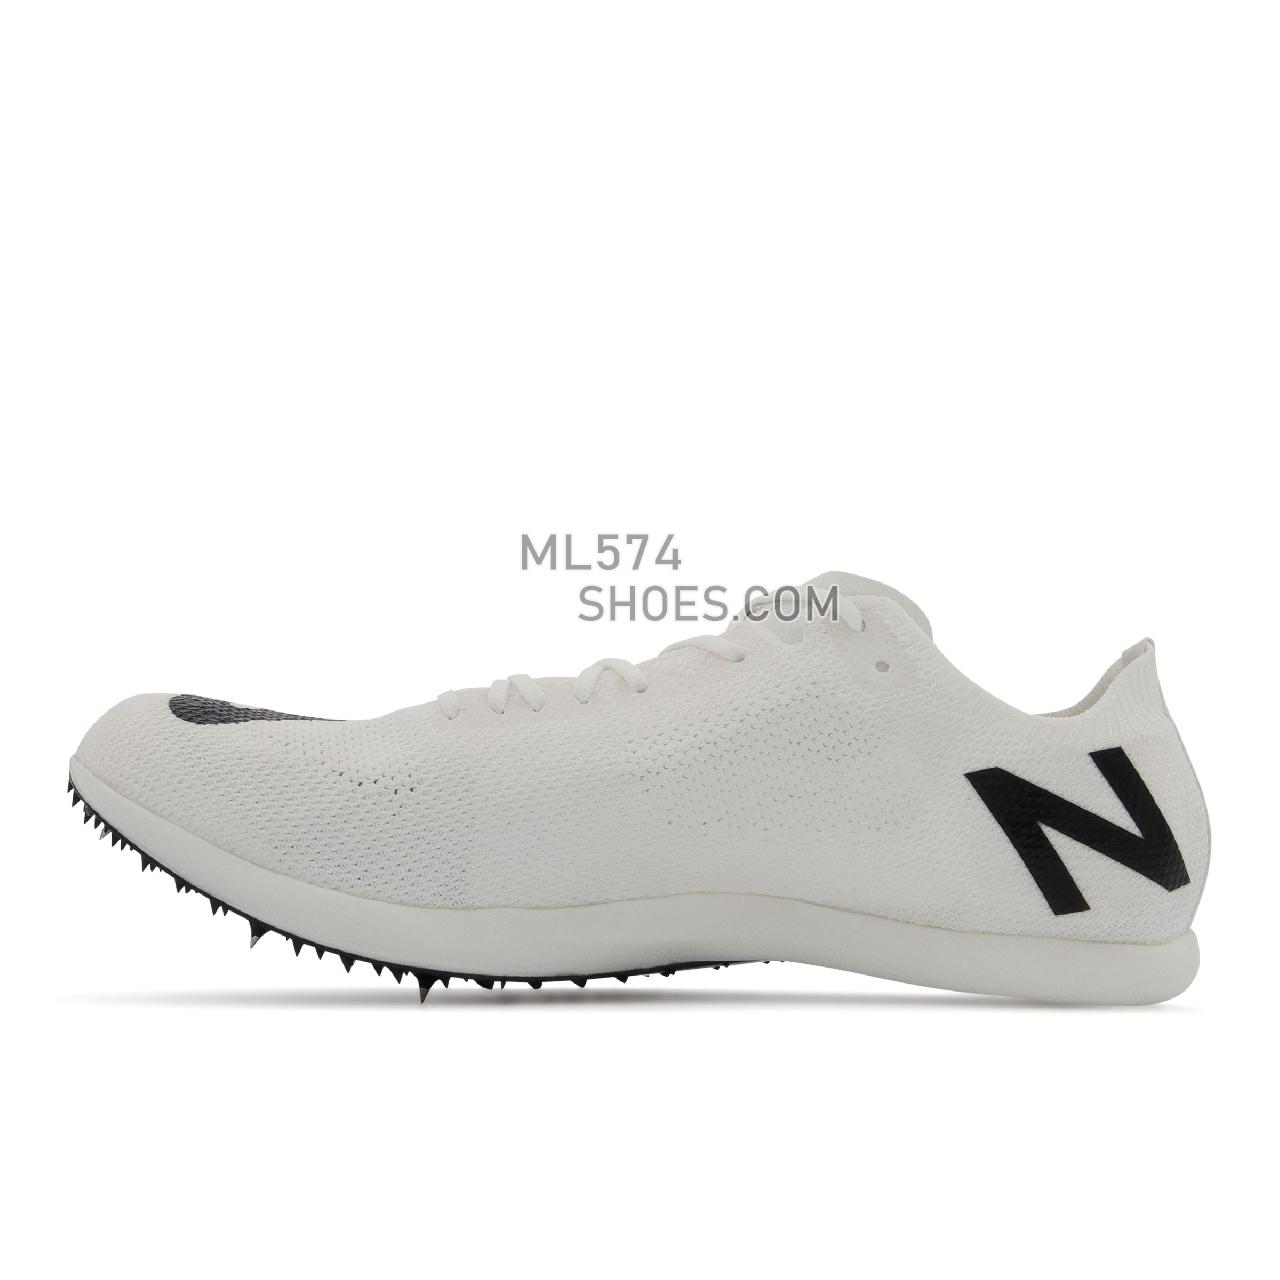 New Balance FuelCell MD-X - Unisex Men's Women's Competition Running - White with Black - UMDELRCX